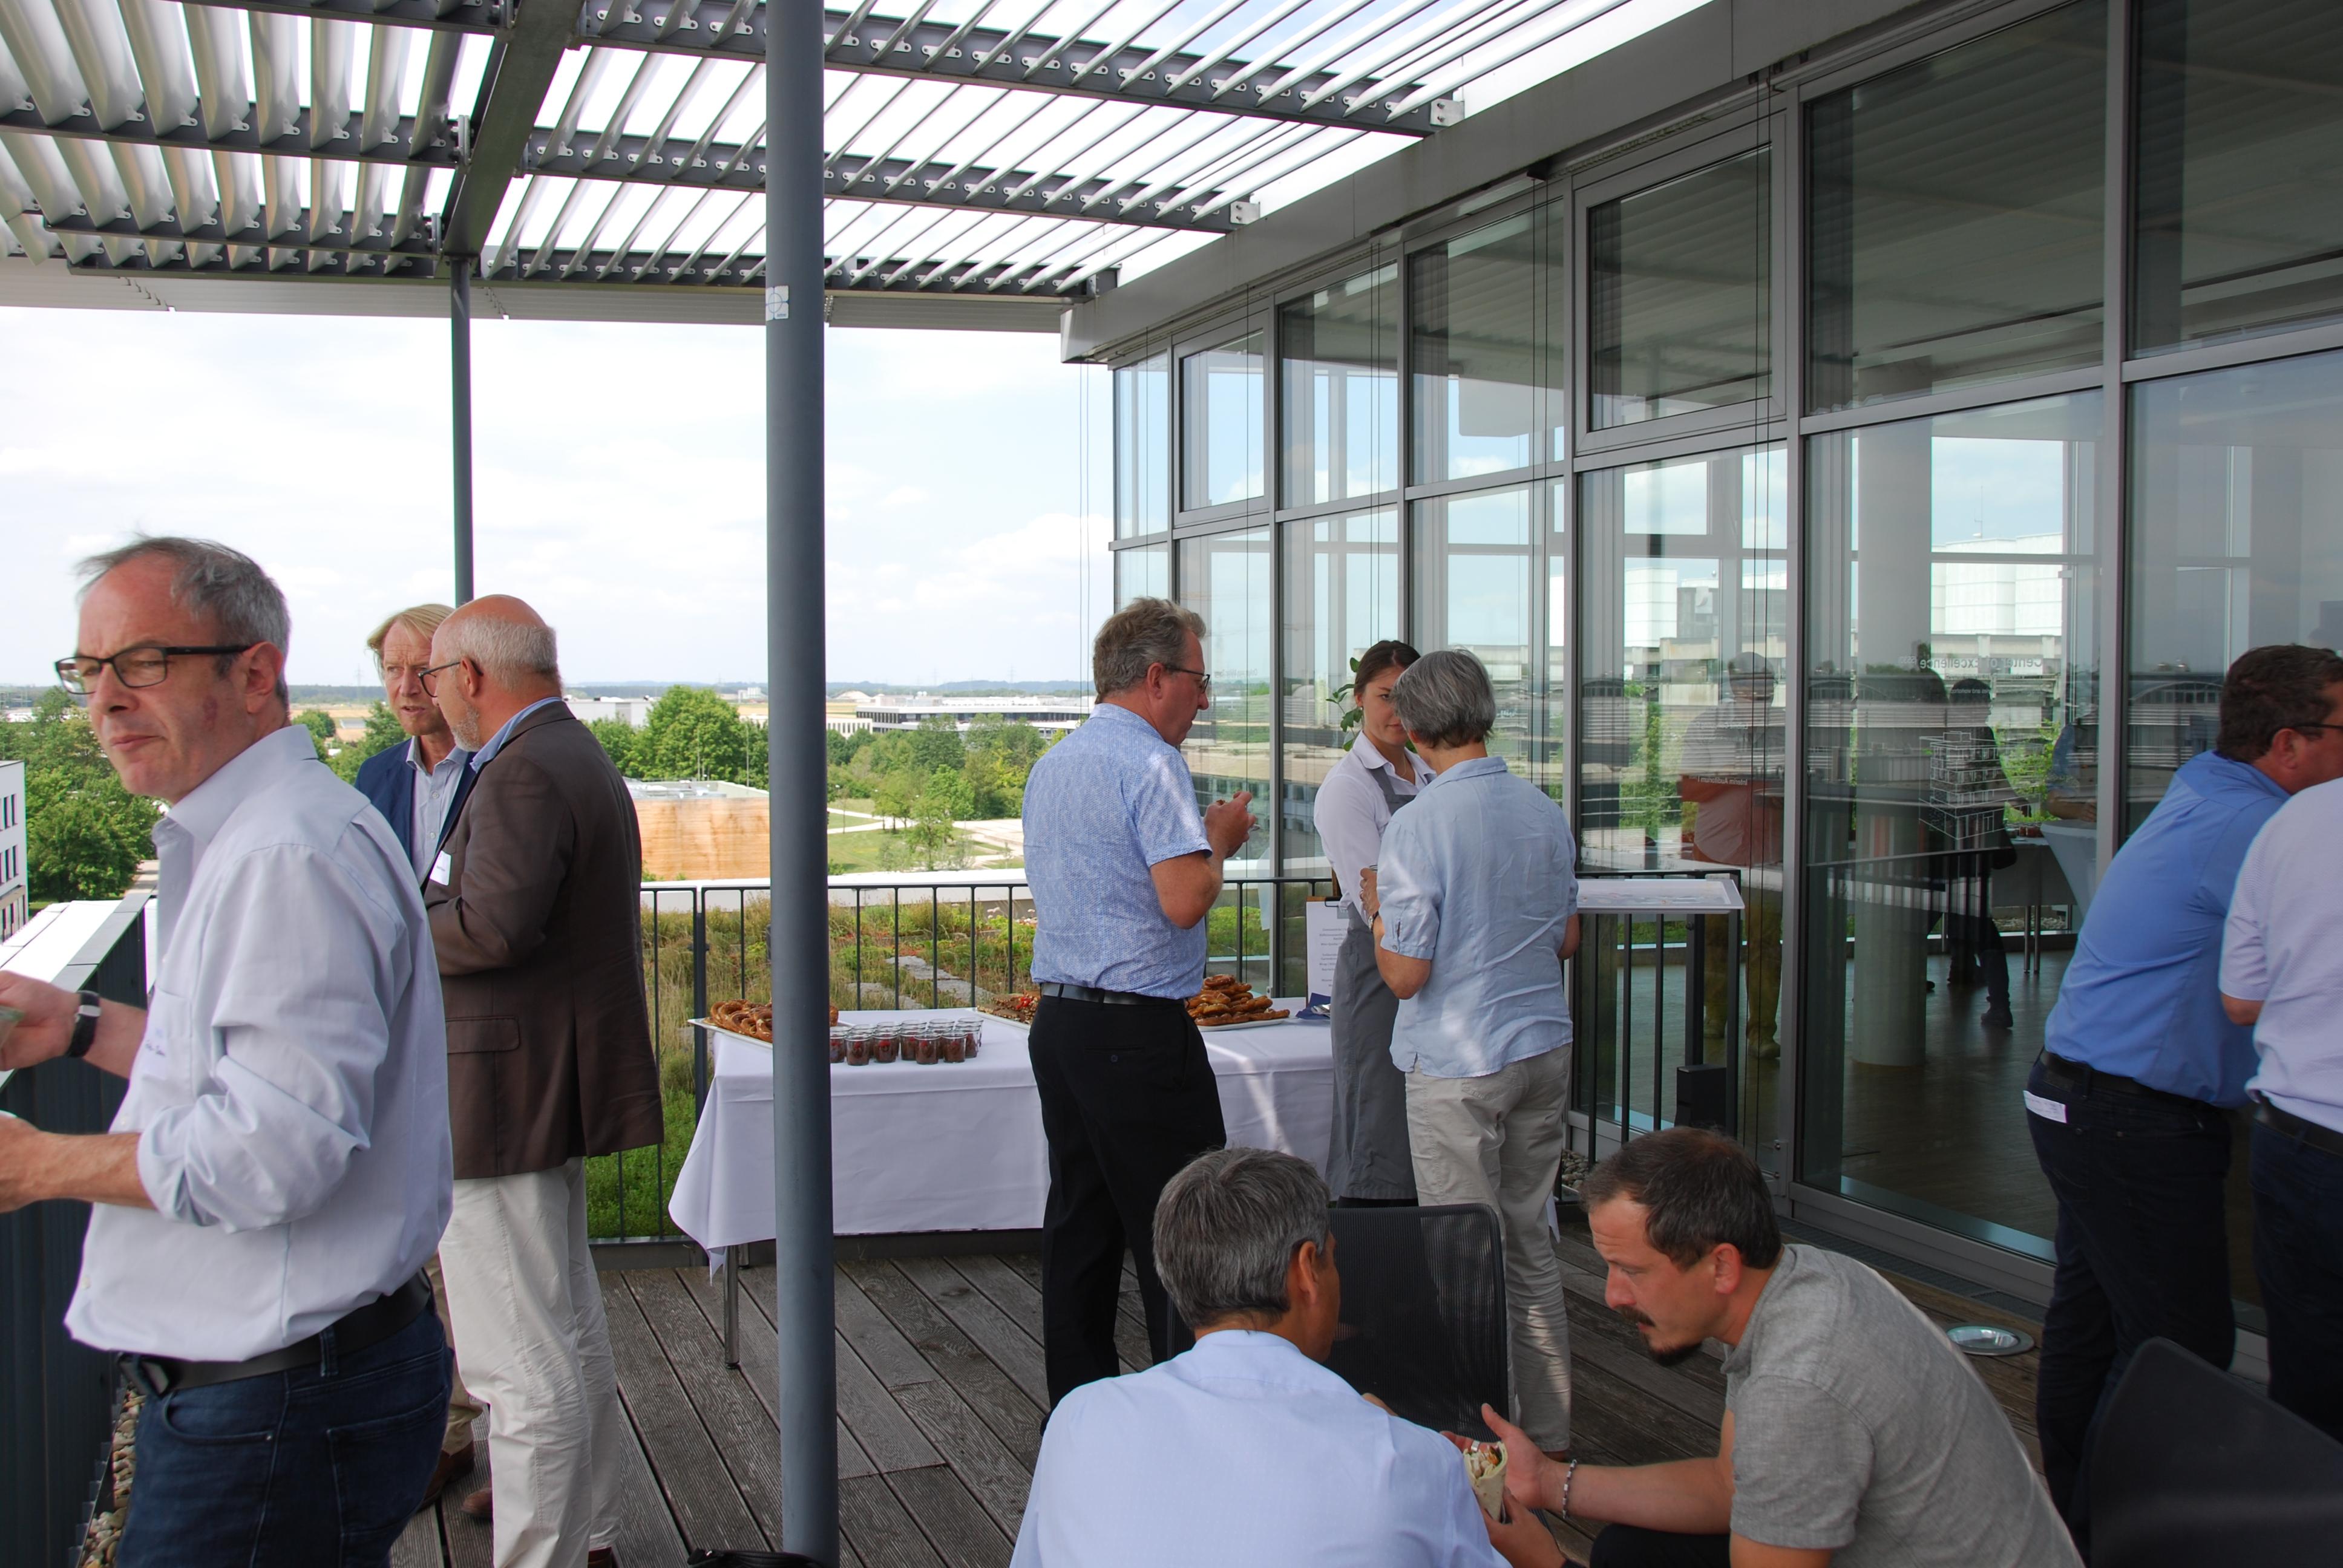 Several small groups of participants chatting on the roof top terrace during lunch break. 